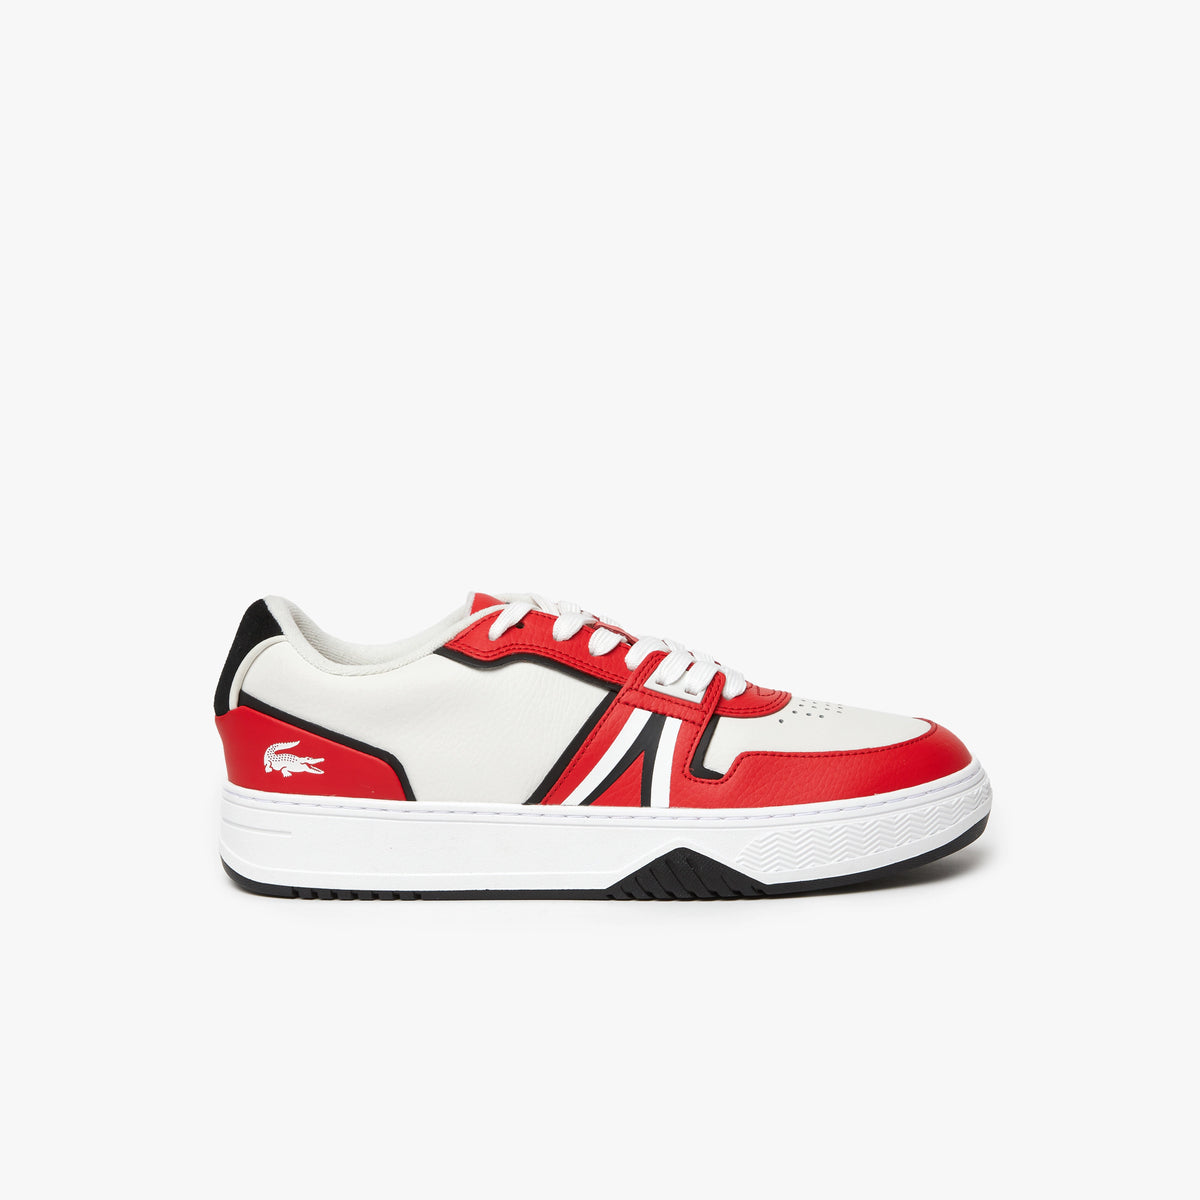 Men's Lacoste L001 Leather Sneakers - Red/White 17K